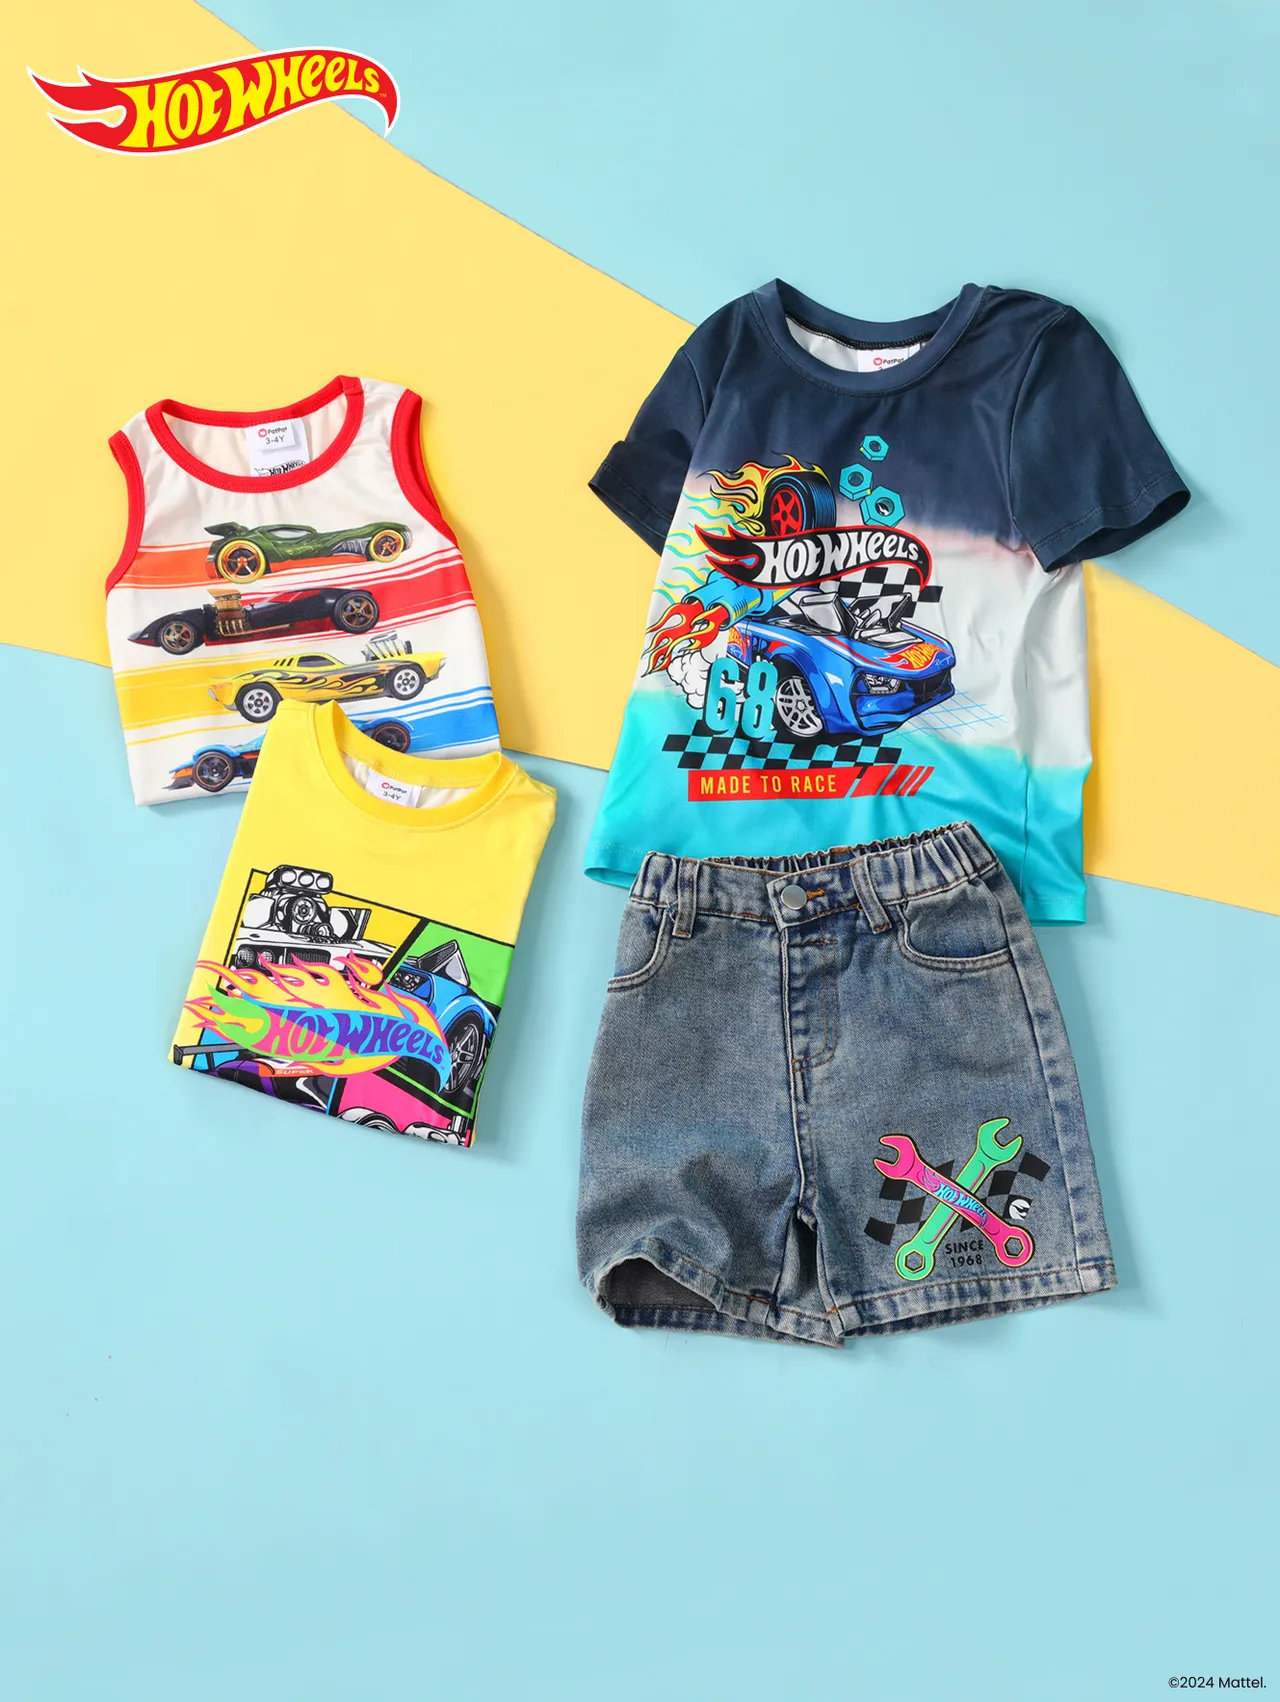 Click it to join Hot Wheels Boys’ Fashion activity